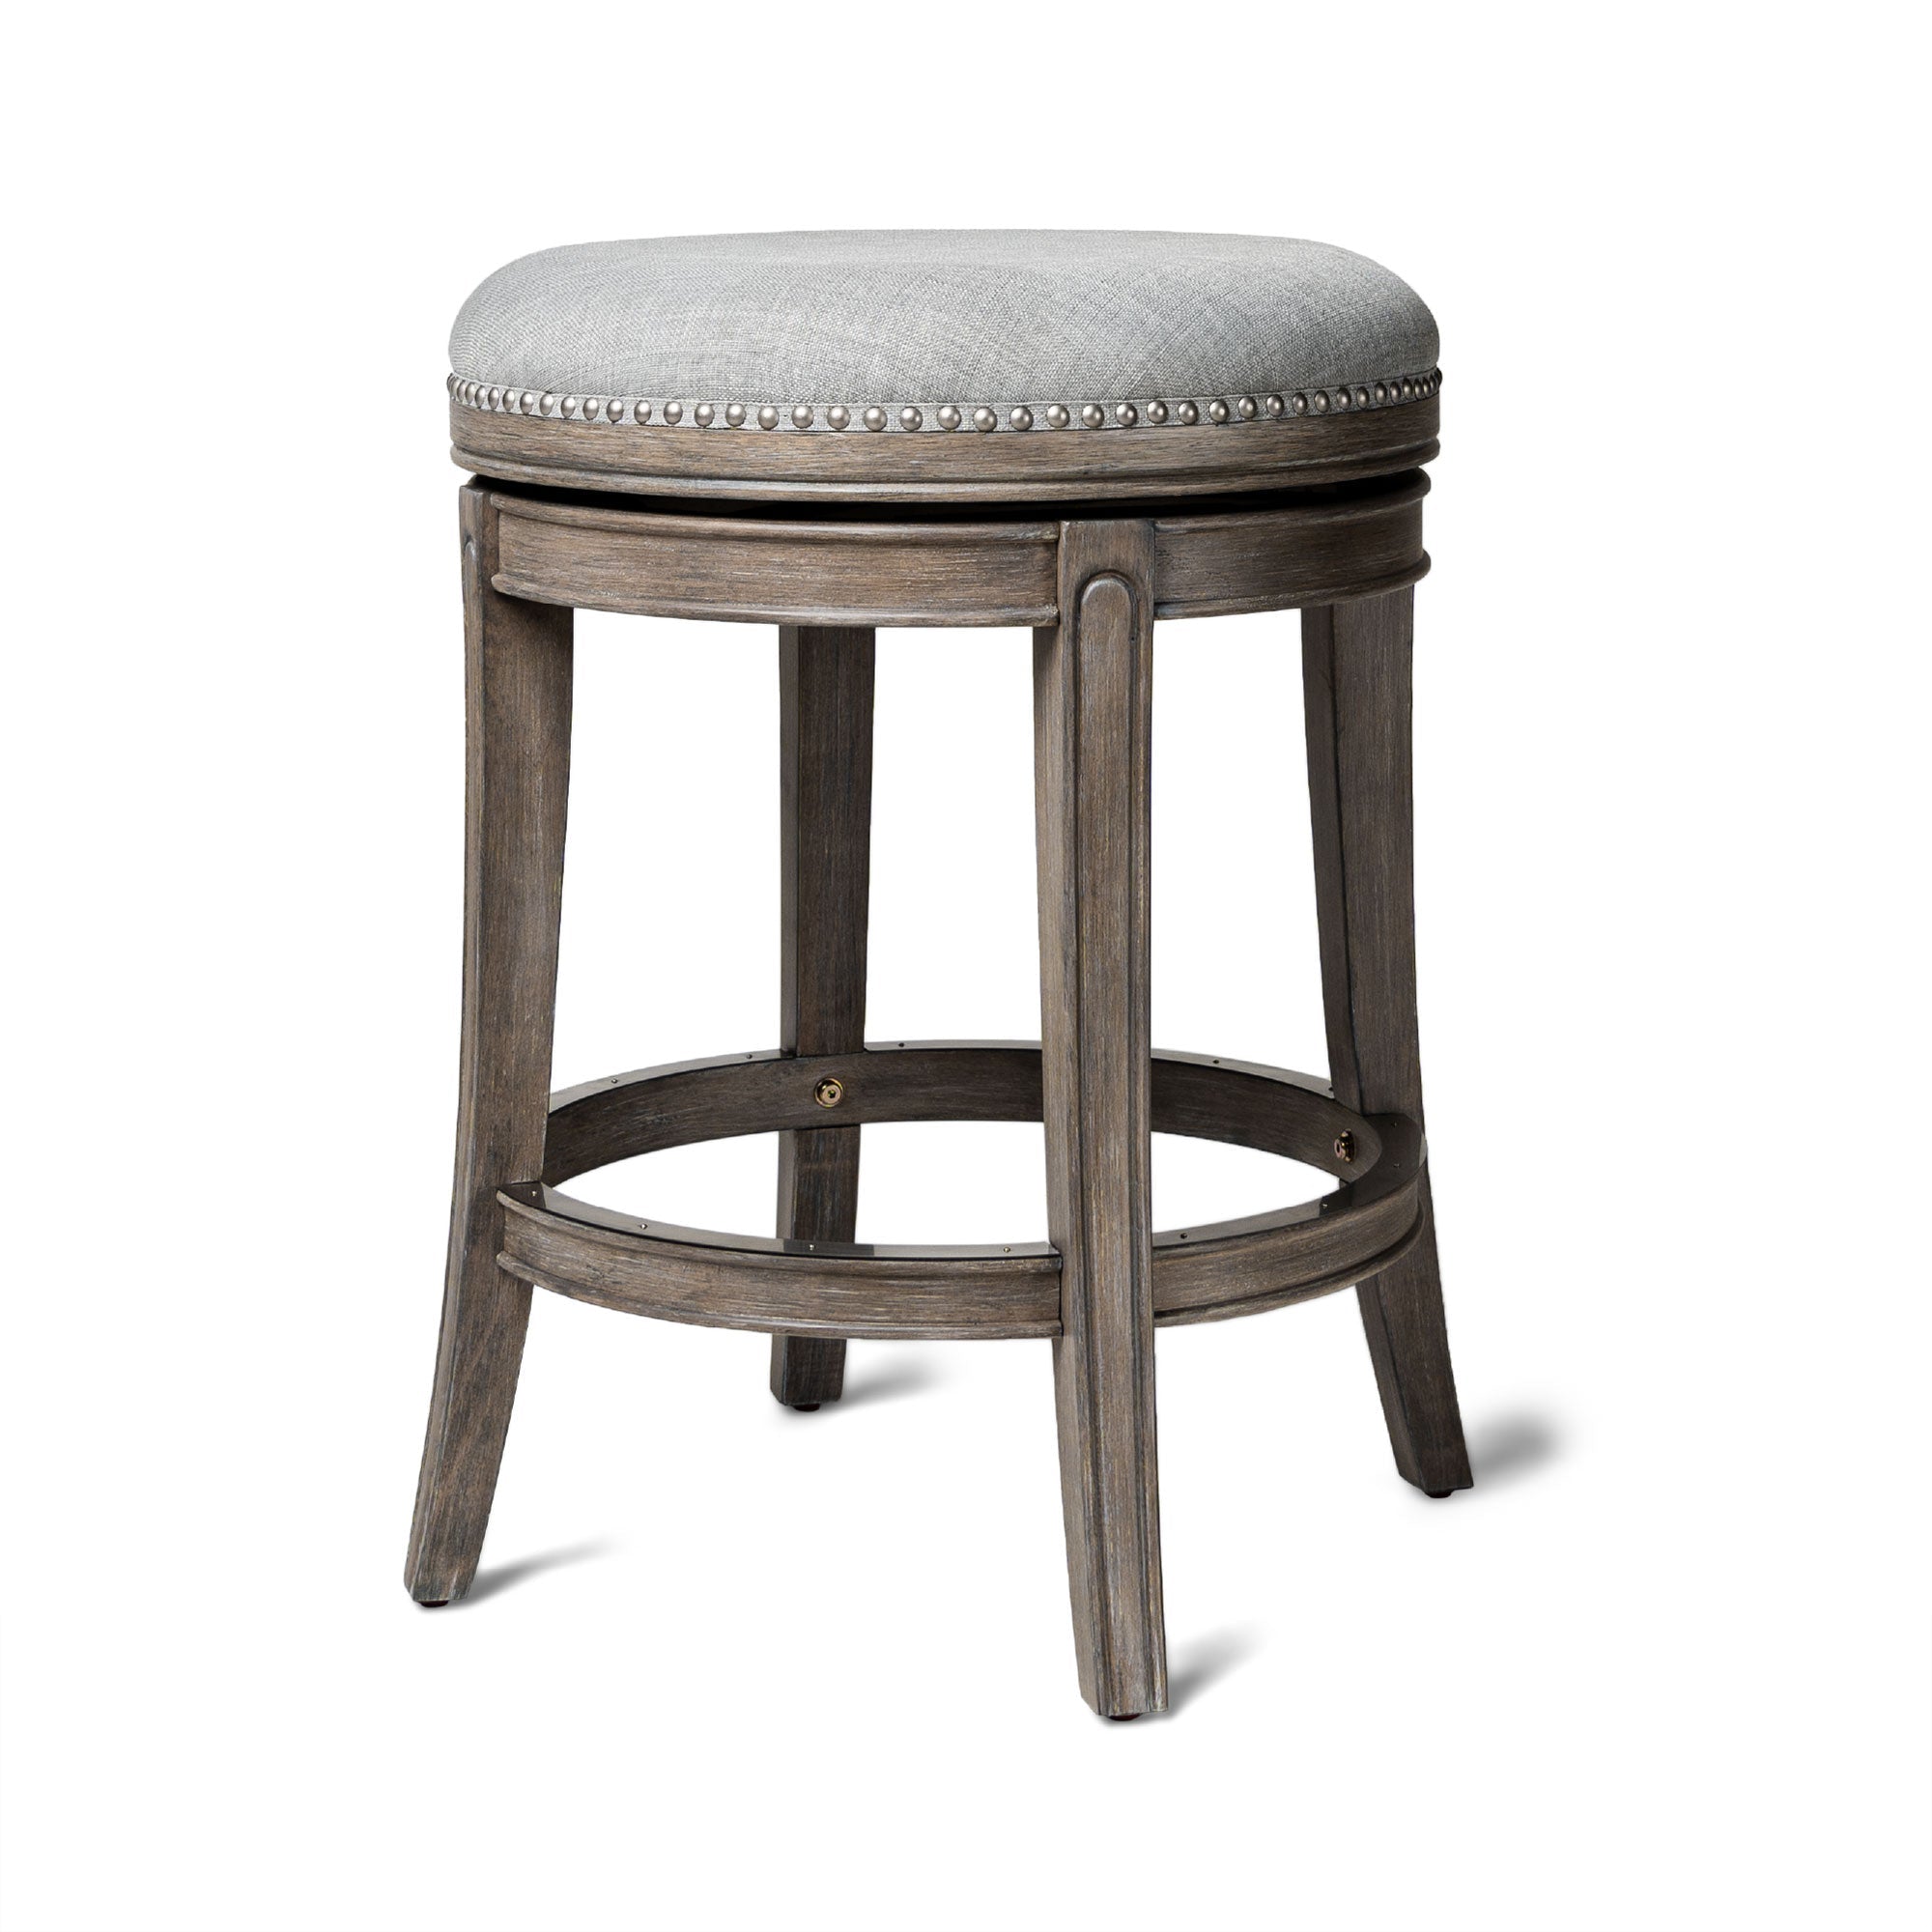 Alexander Backless Counter Stool in Reclaimed Oak Finish with Ash Grey Fabric Upholstery in Stools by Maven Lane